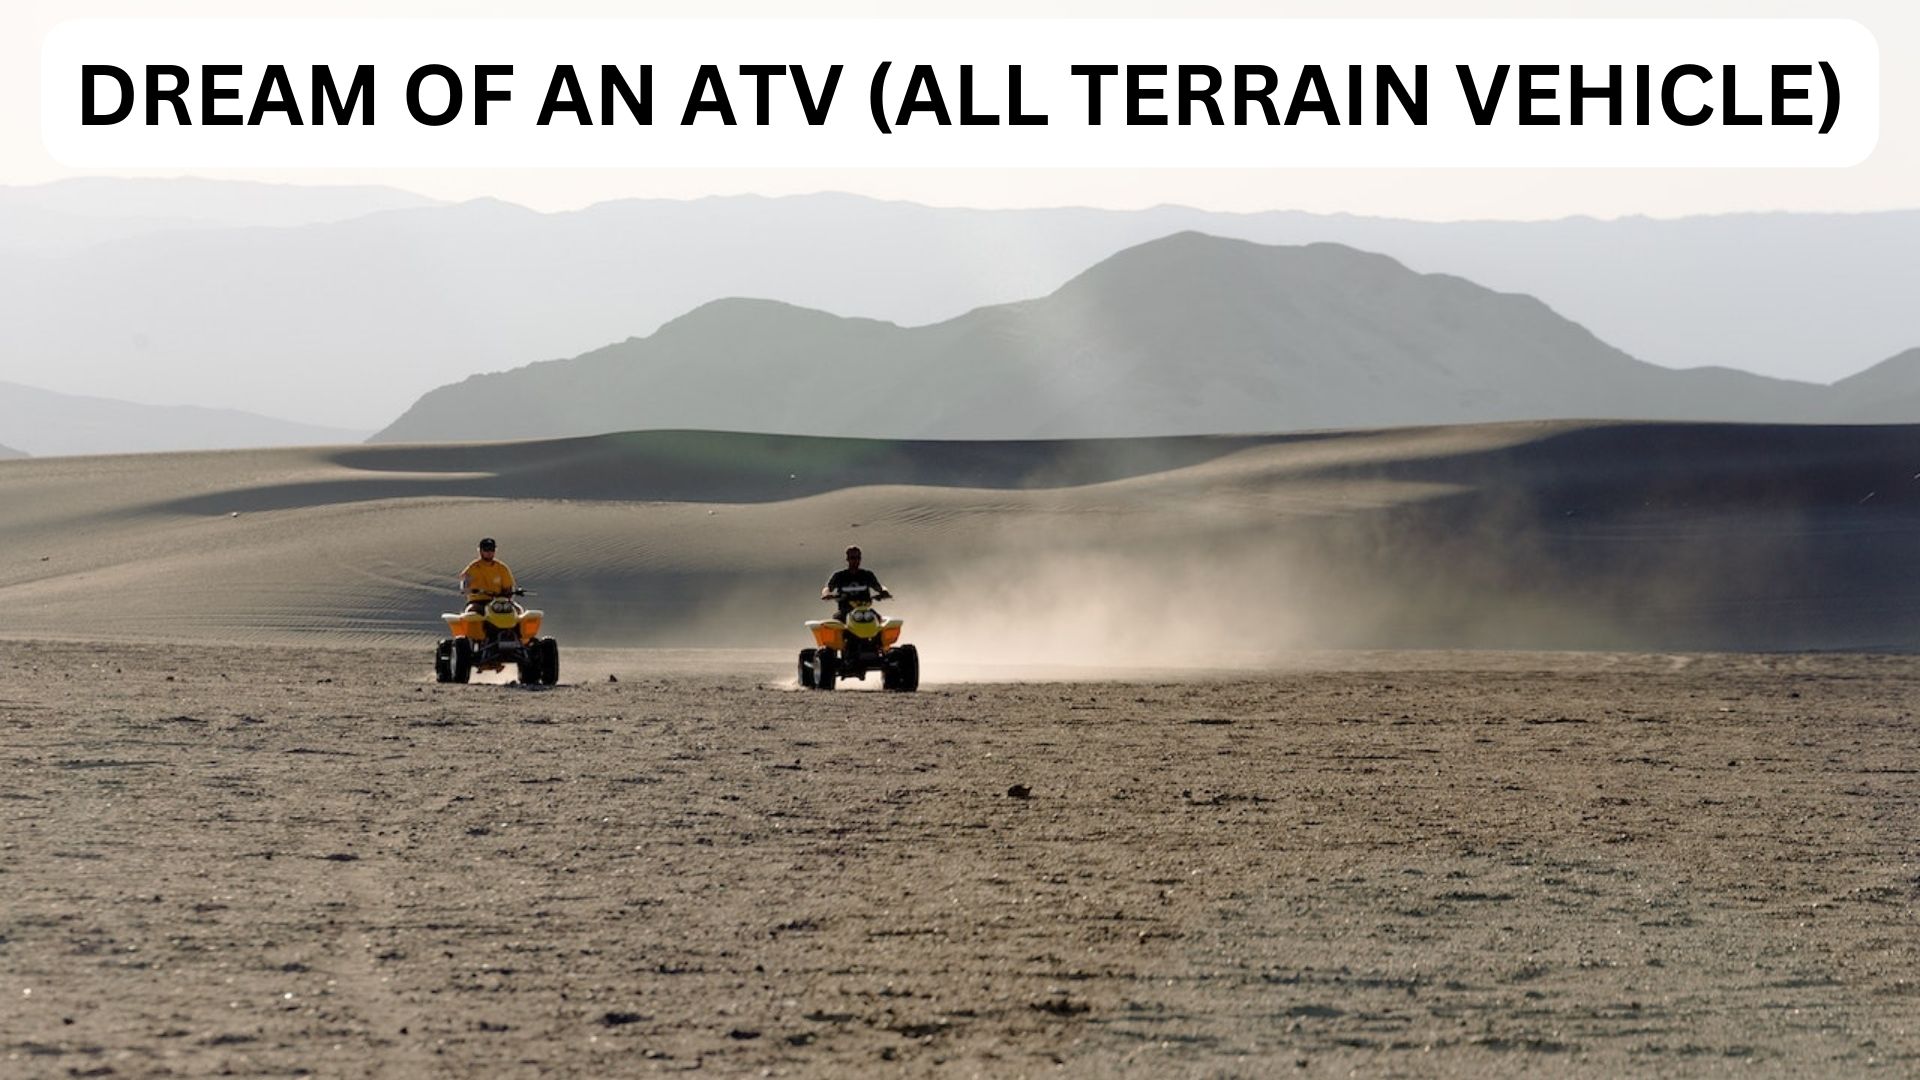 Dream Of An ATV (All Terrain Vehicle) - Represents Adventure And Challenge